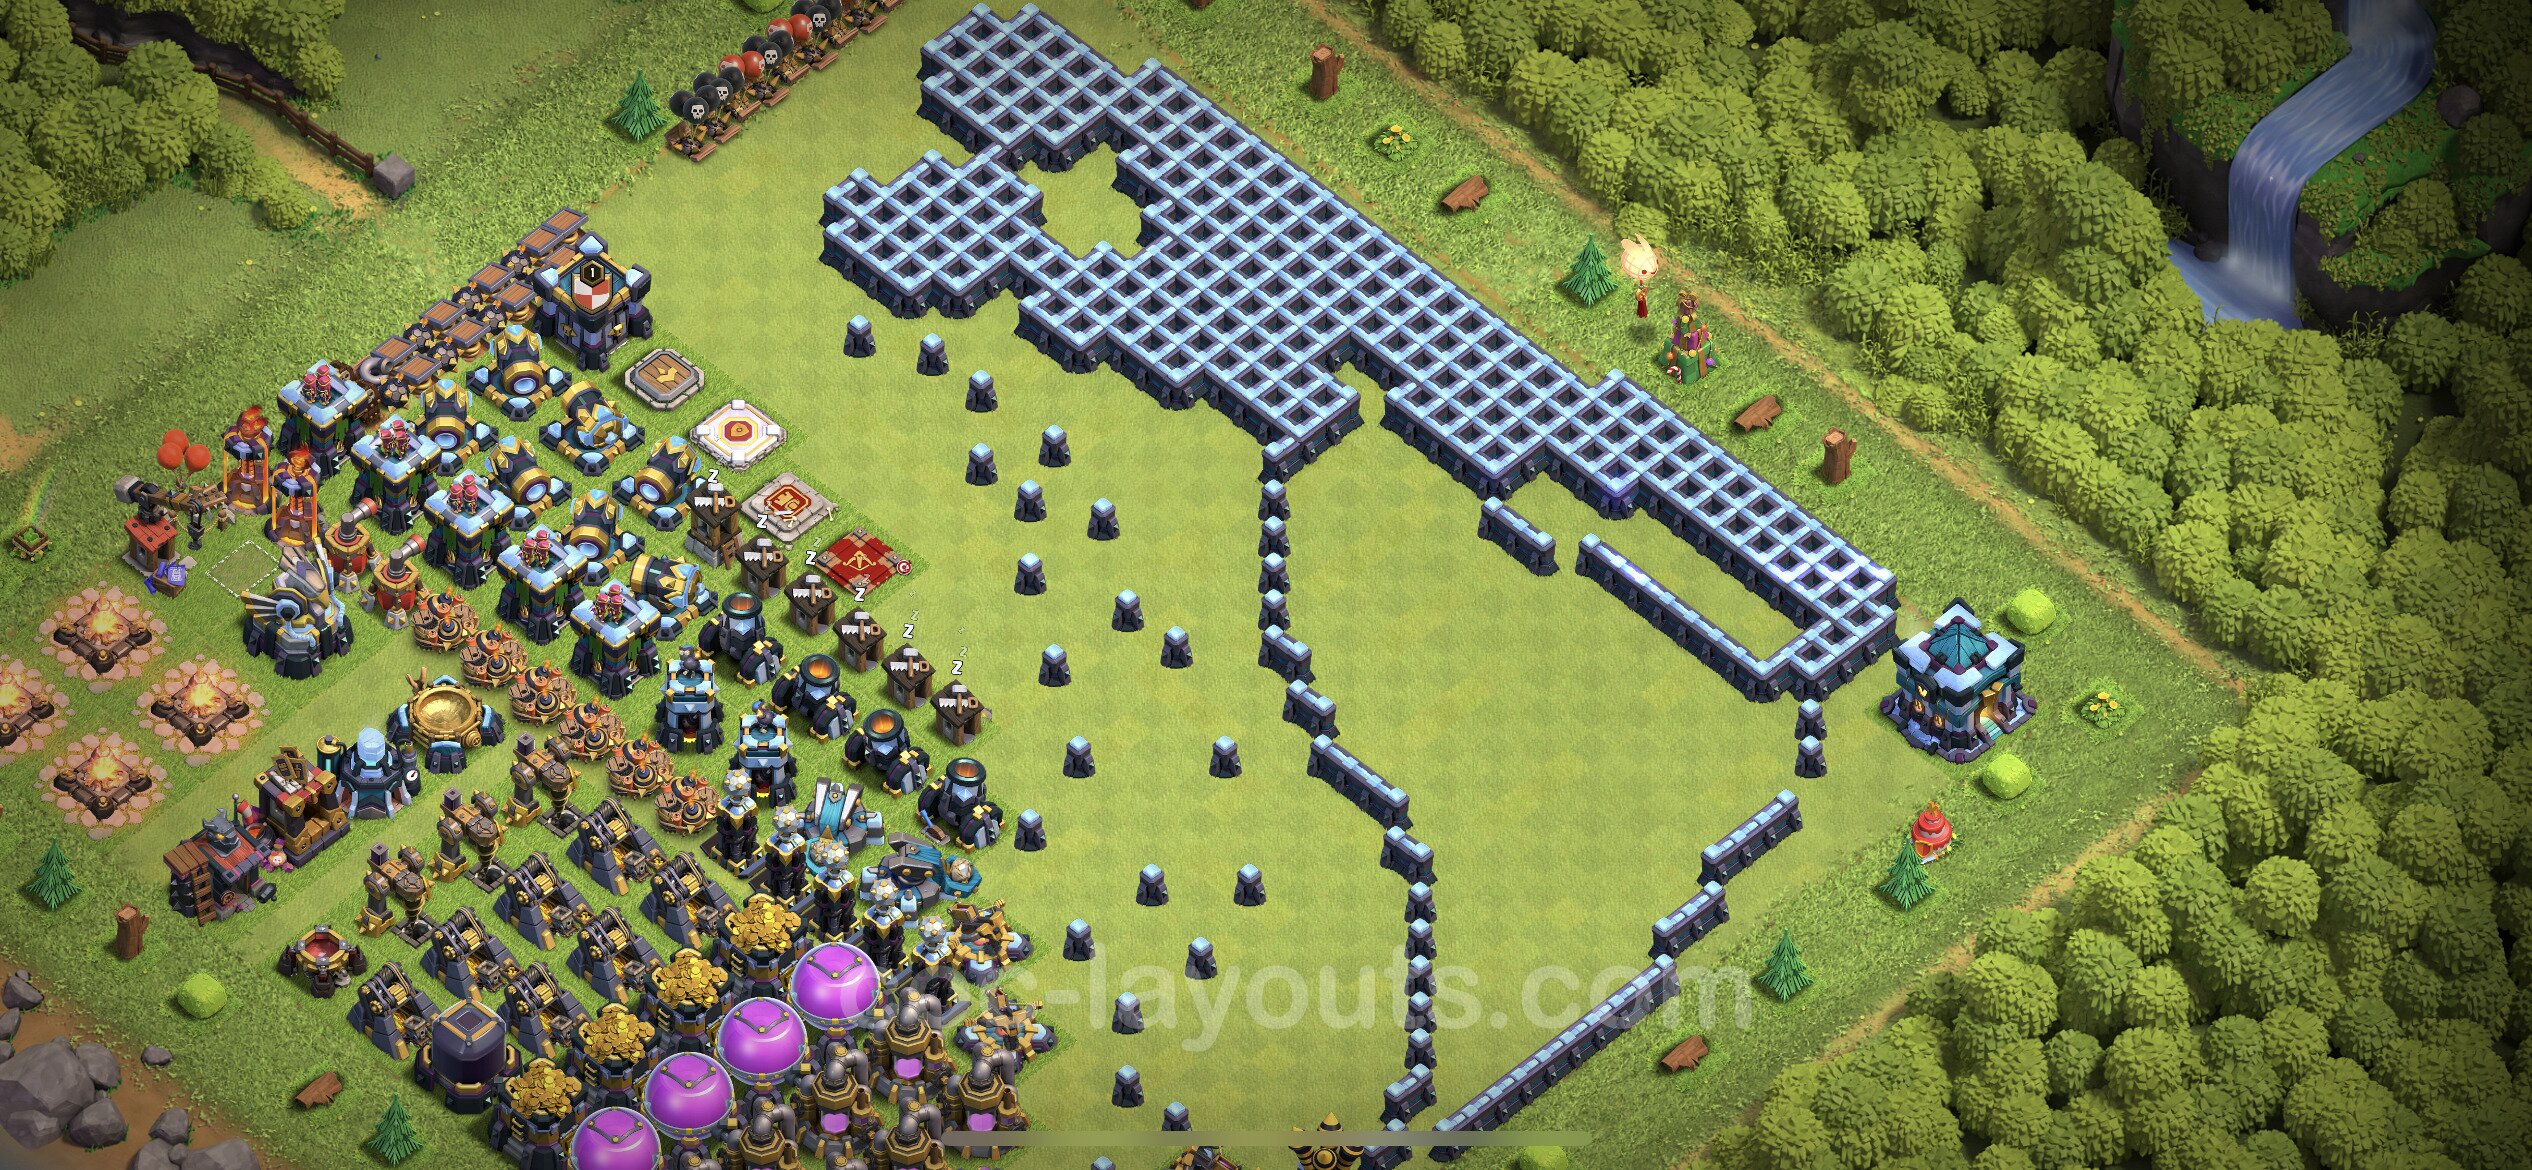 Best Funny Troll Base TH13 with Link - Town Hall Level 13 Art Base Copy -  (#17)